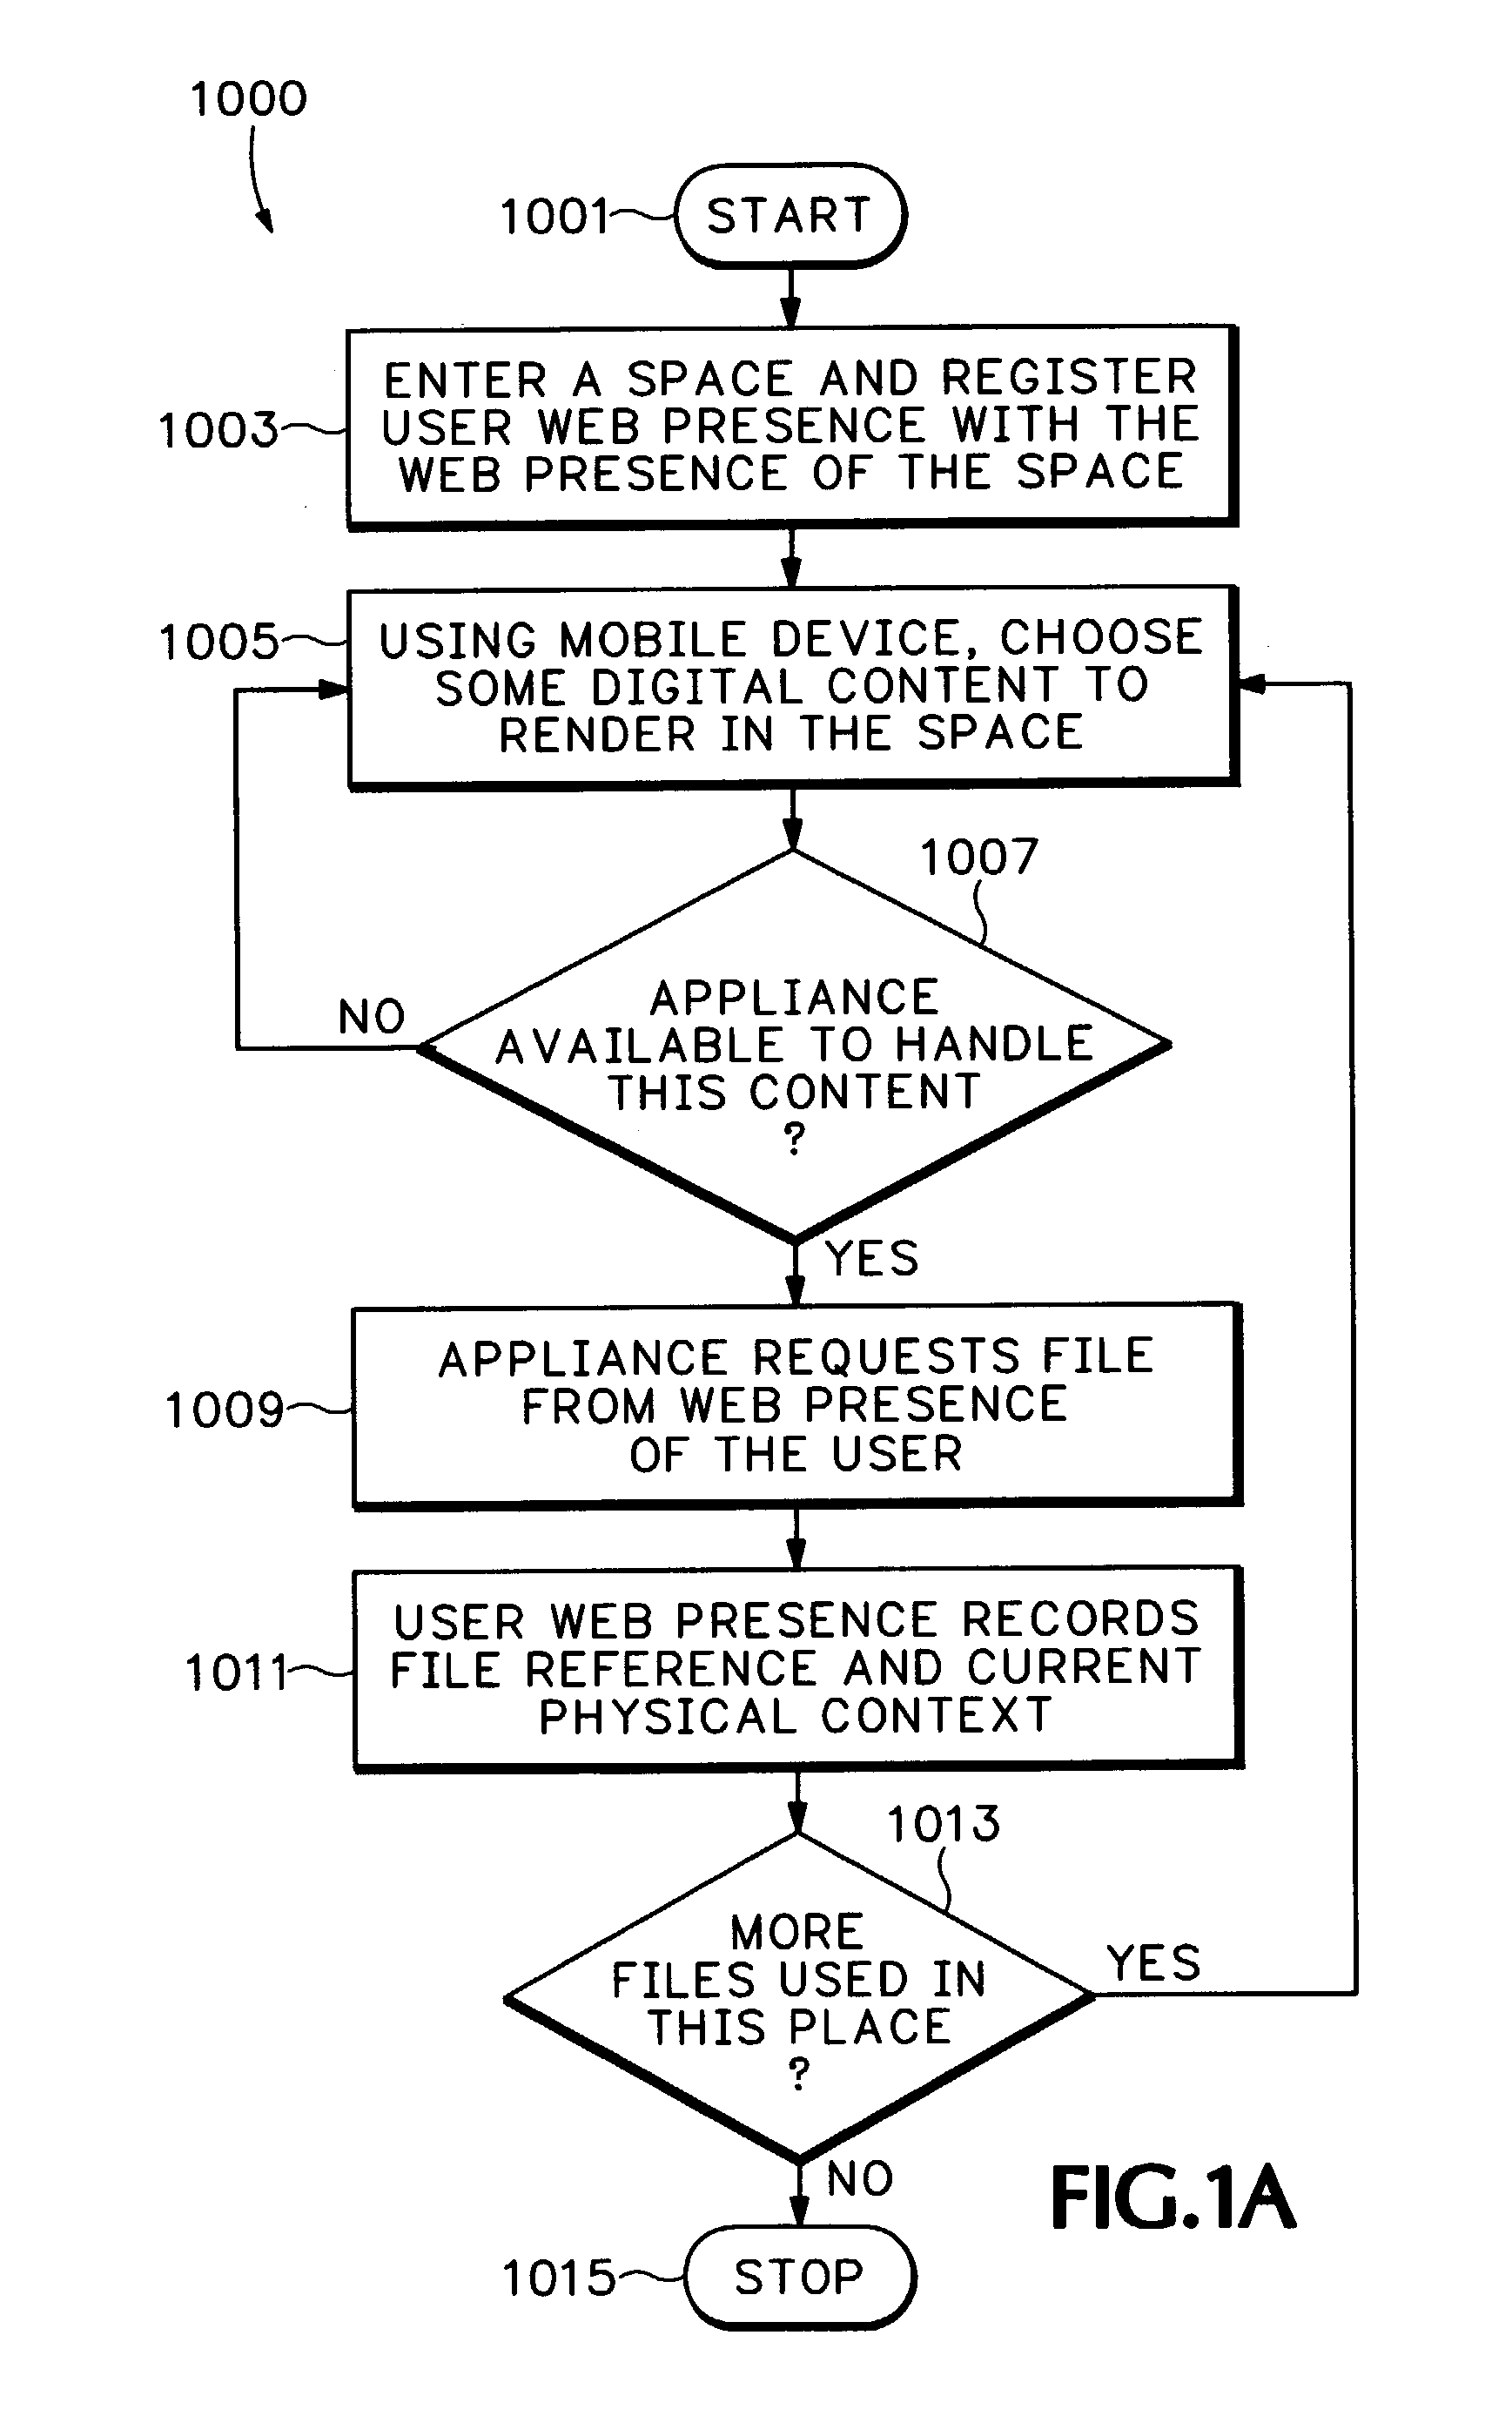 File processing using mapping between web presences